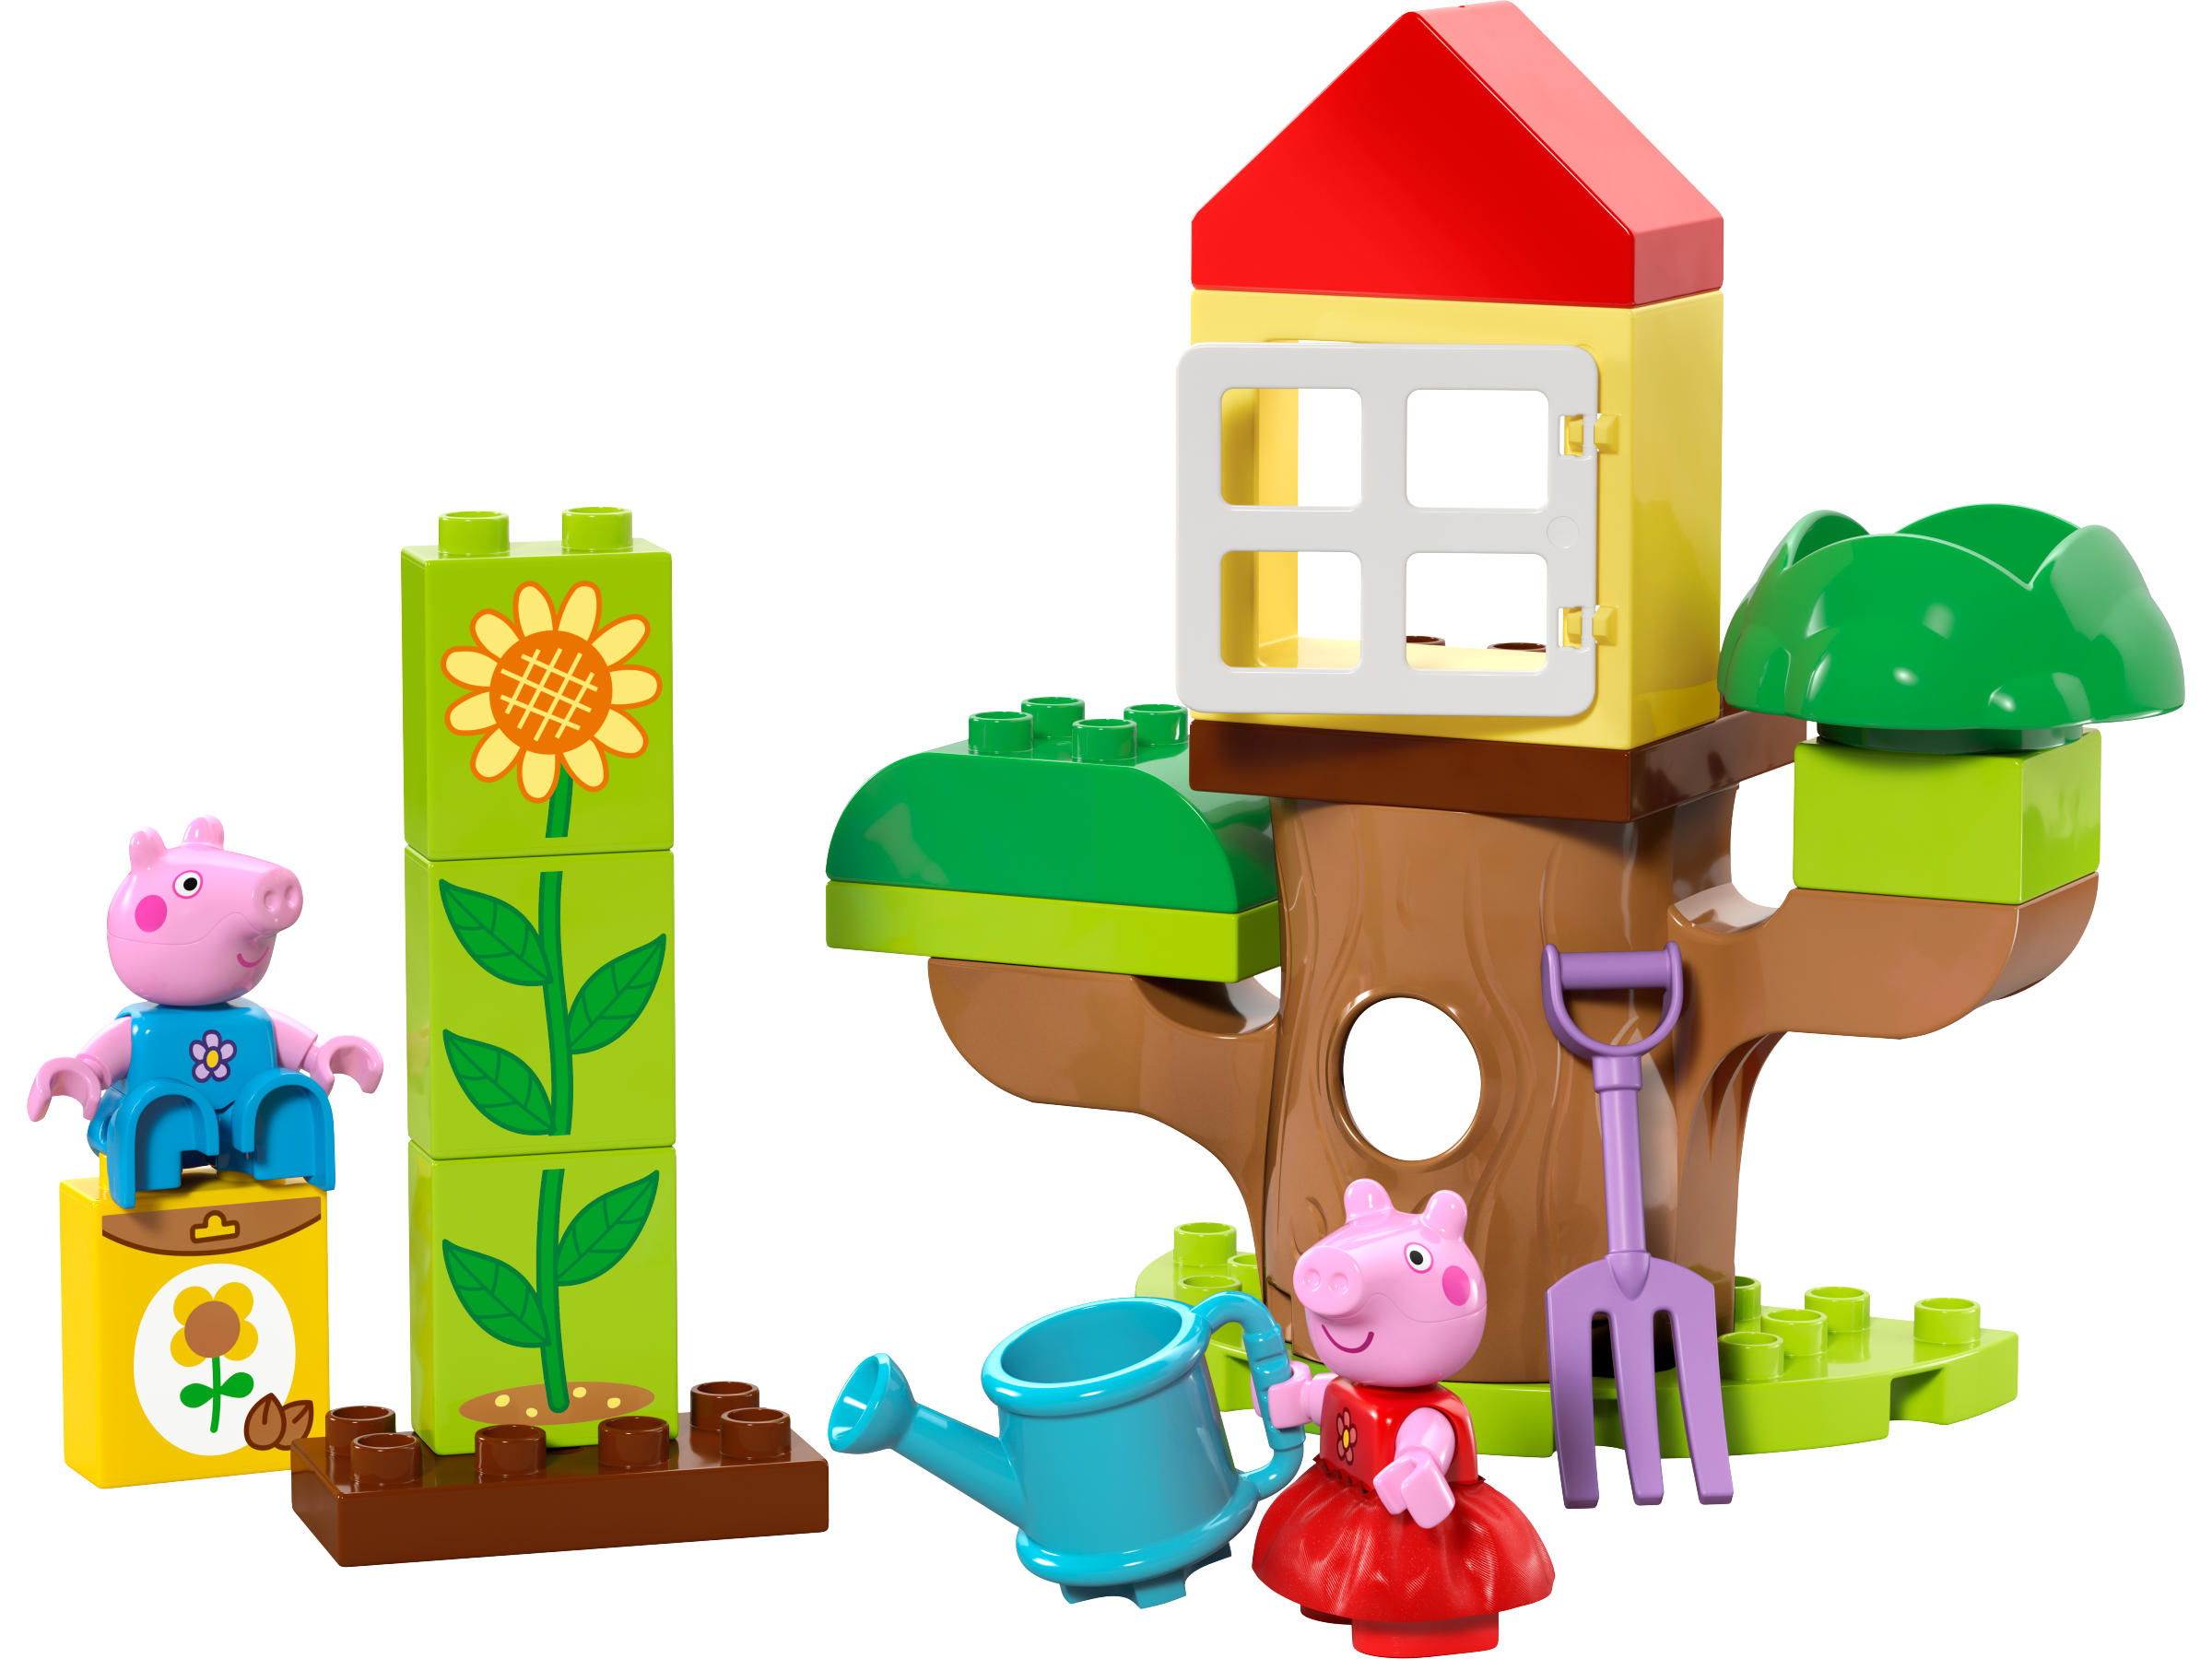 Lego 10431 Peppa Pig Garden and Tree House